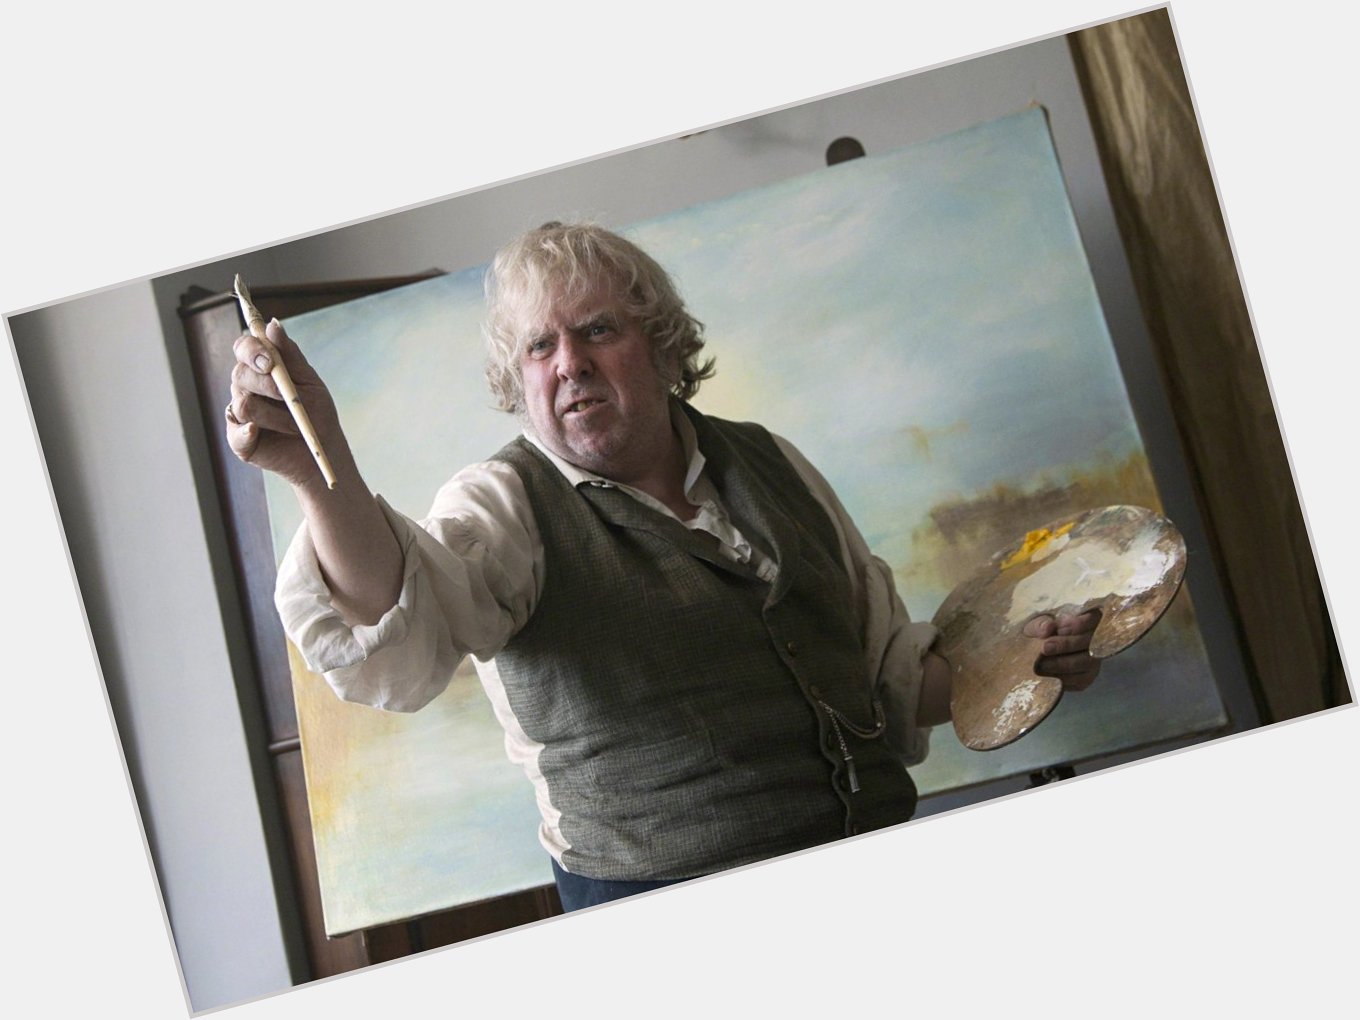 Happy Birthday Timothy Spall. He\s 58 today. Here he is in \Mr. Turner\ (Mike Leigh, 1914) 